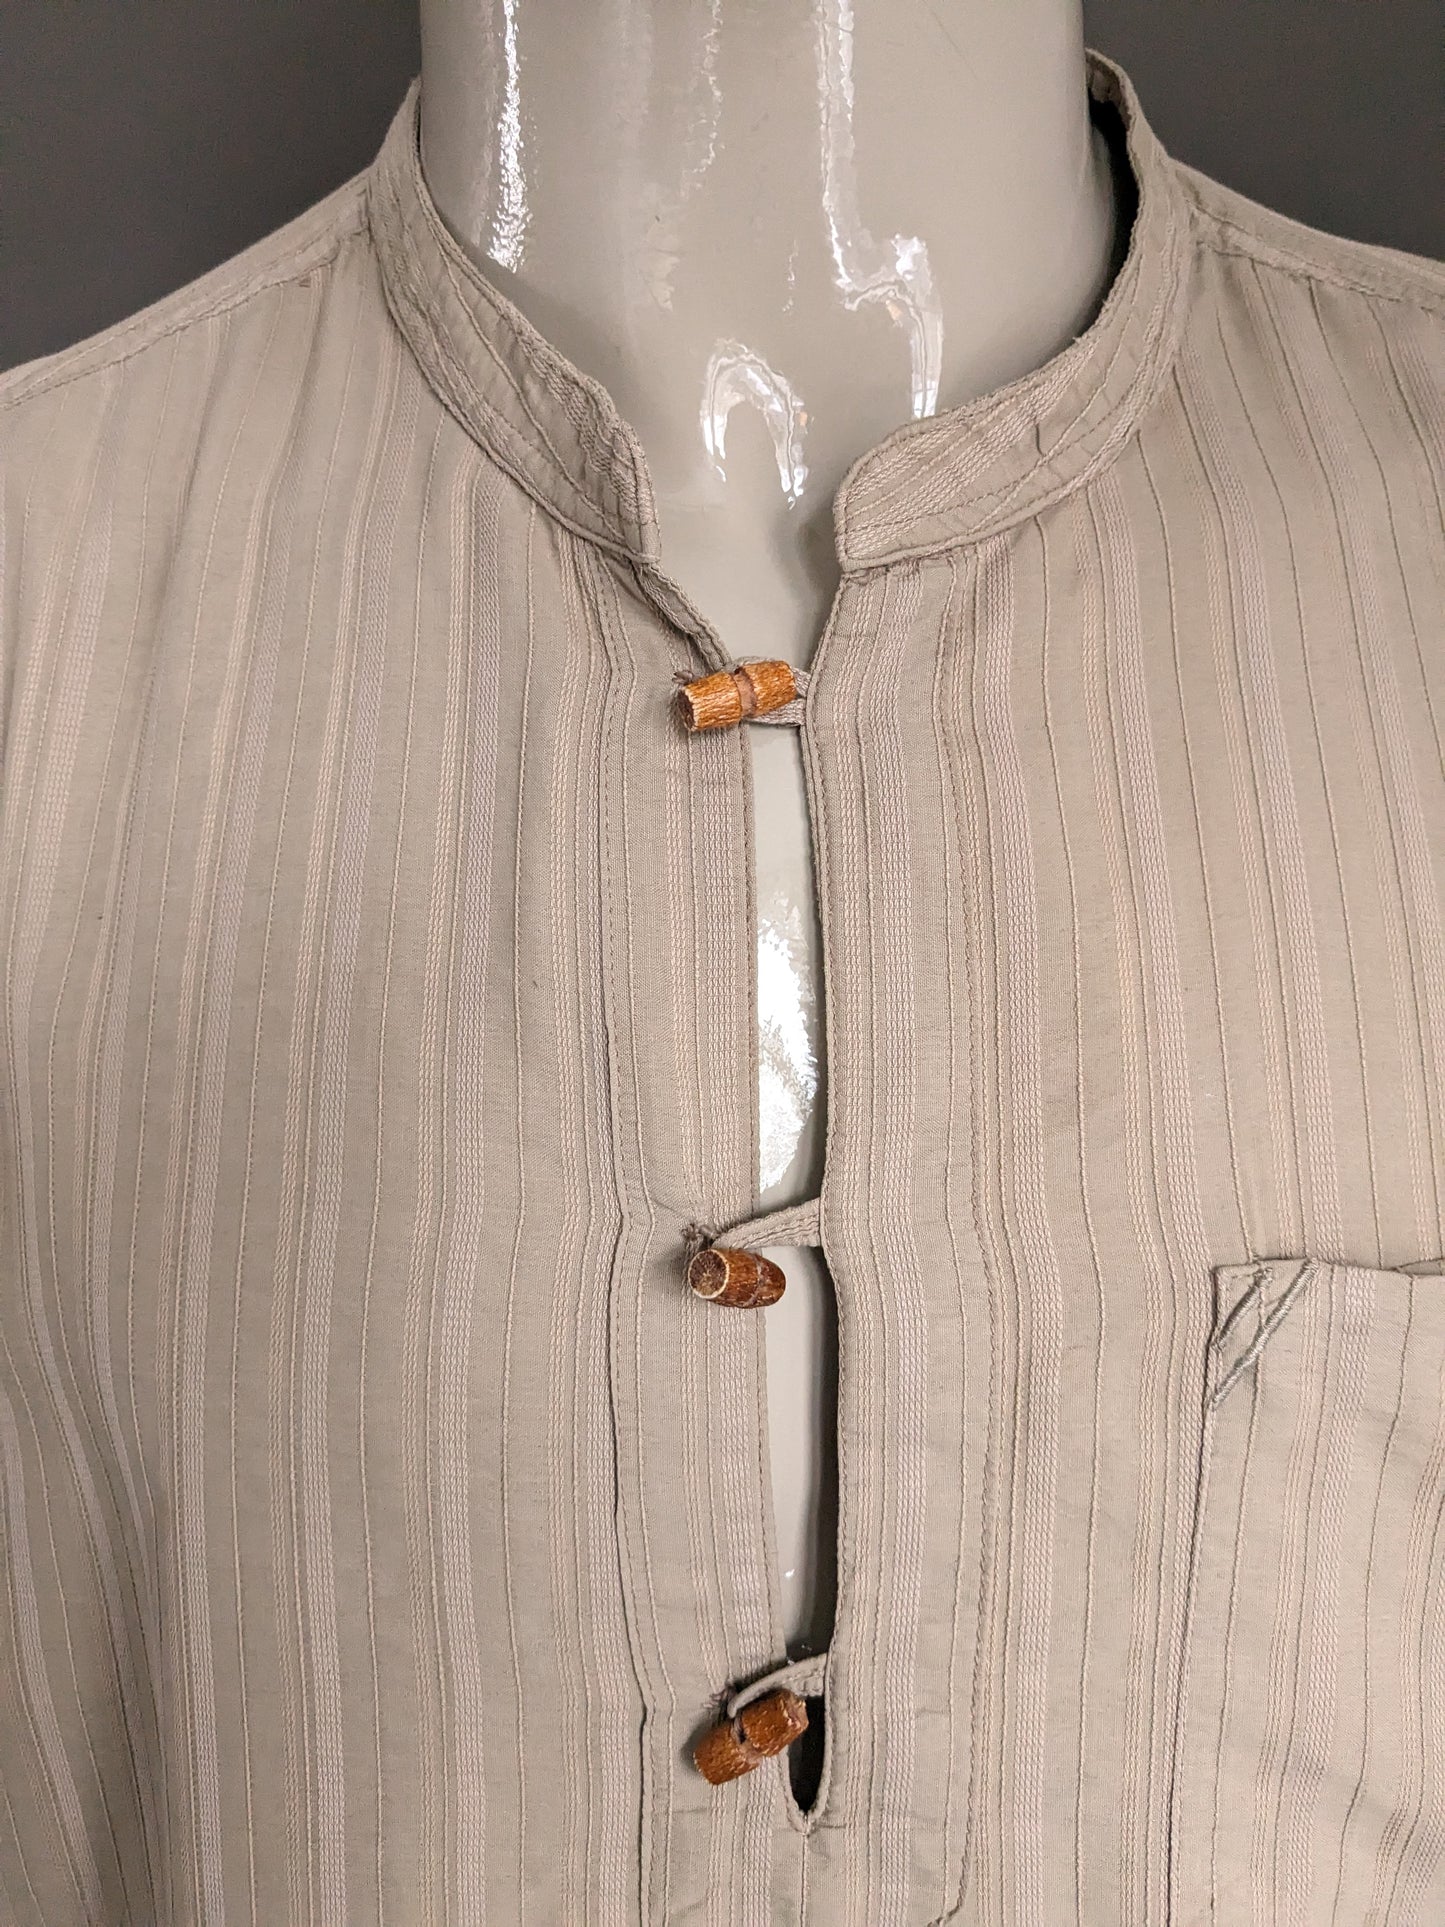 G-club shirt / polo mao / raised collar with wooden buttons. Light brown motif. Size XXL / 2XL.